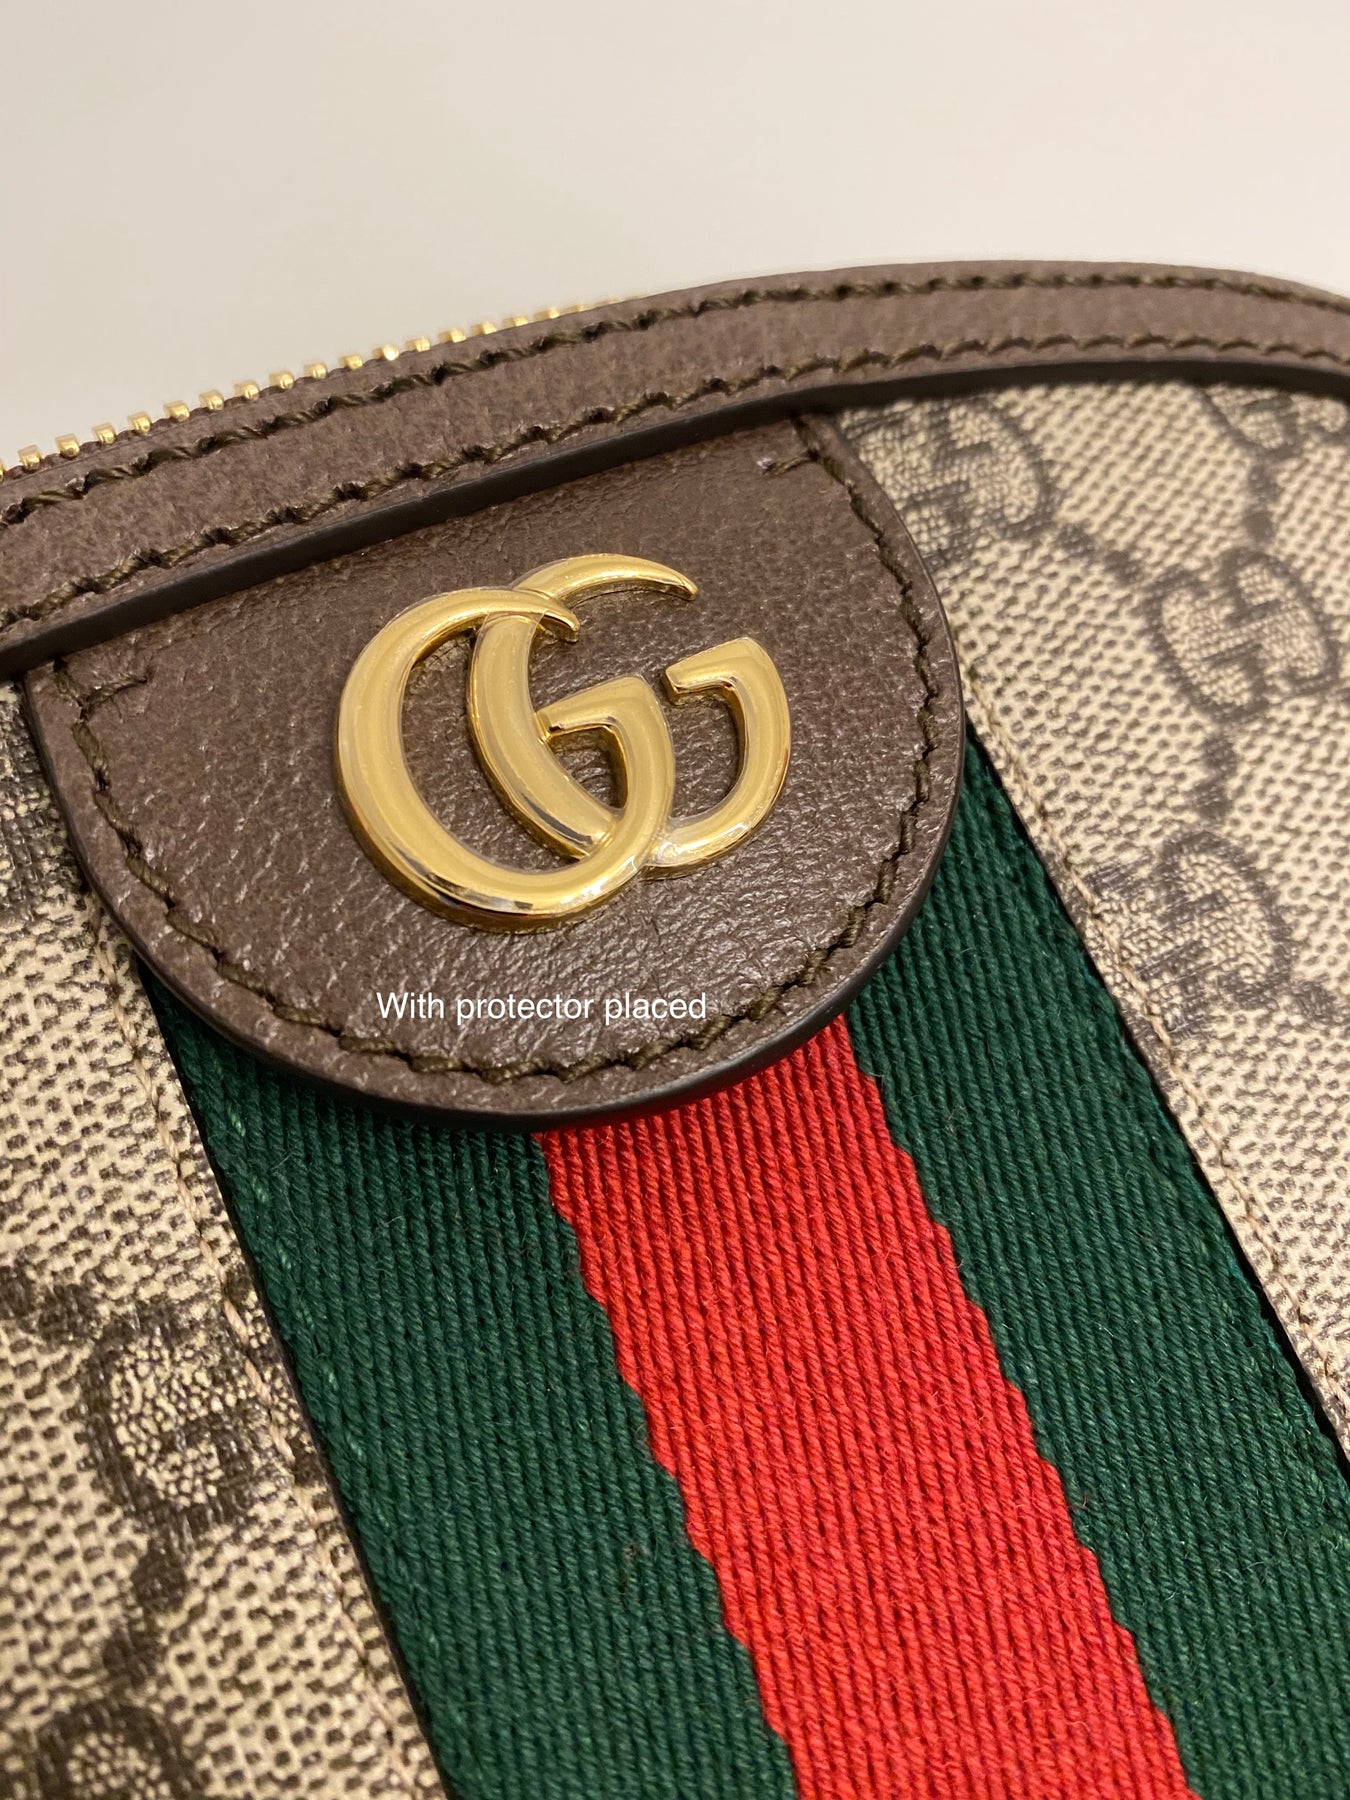 Gucci Ophidia GG Small Shoulder Bag Review, What Fits